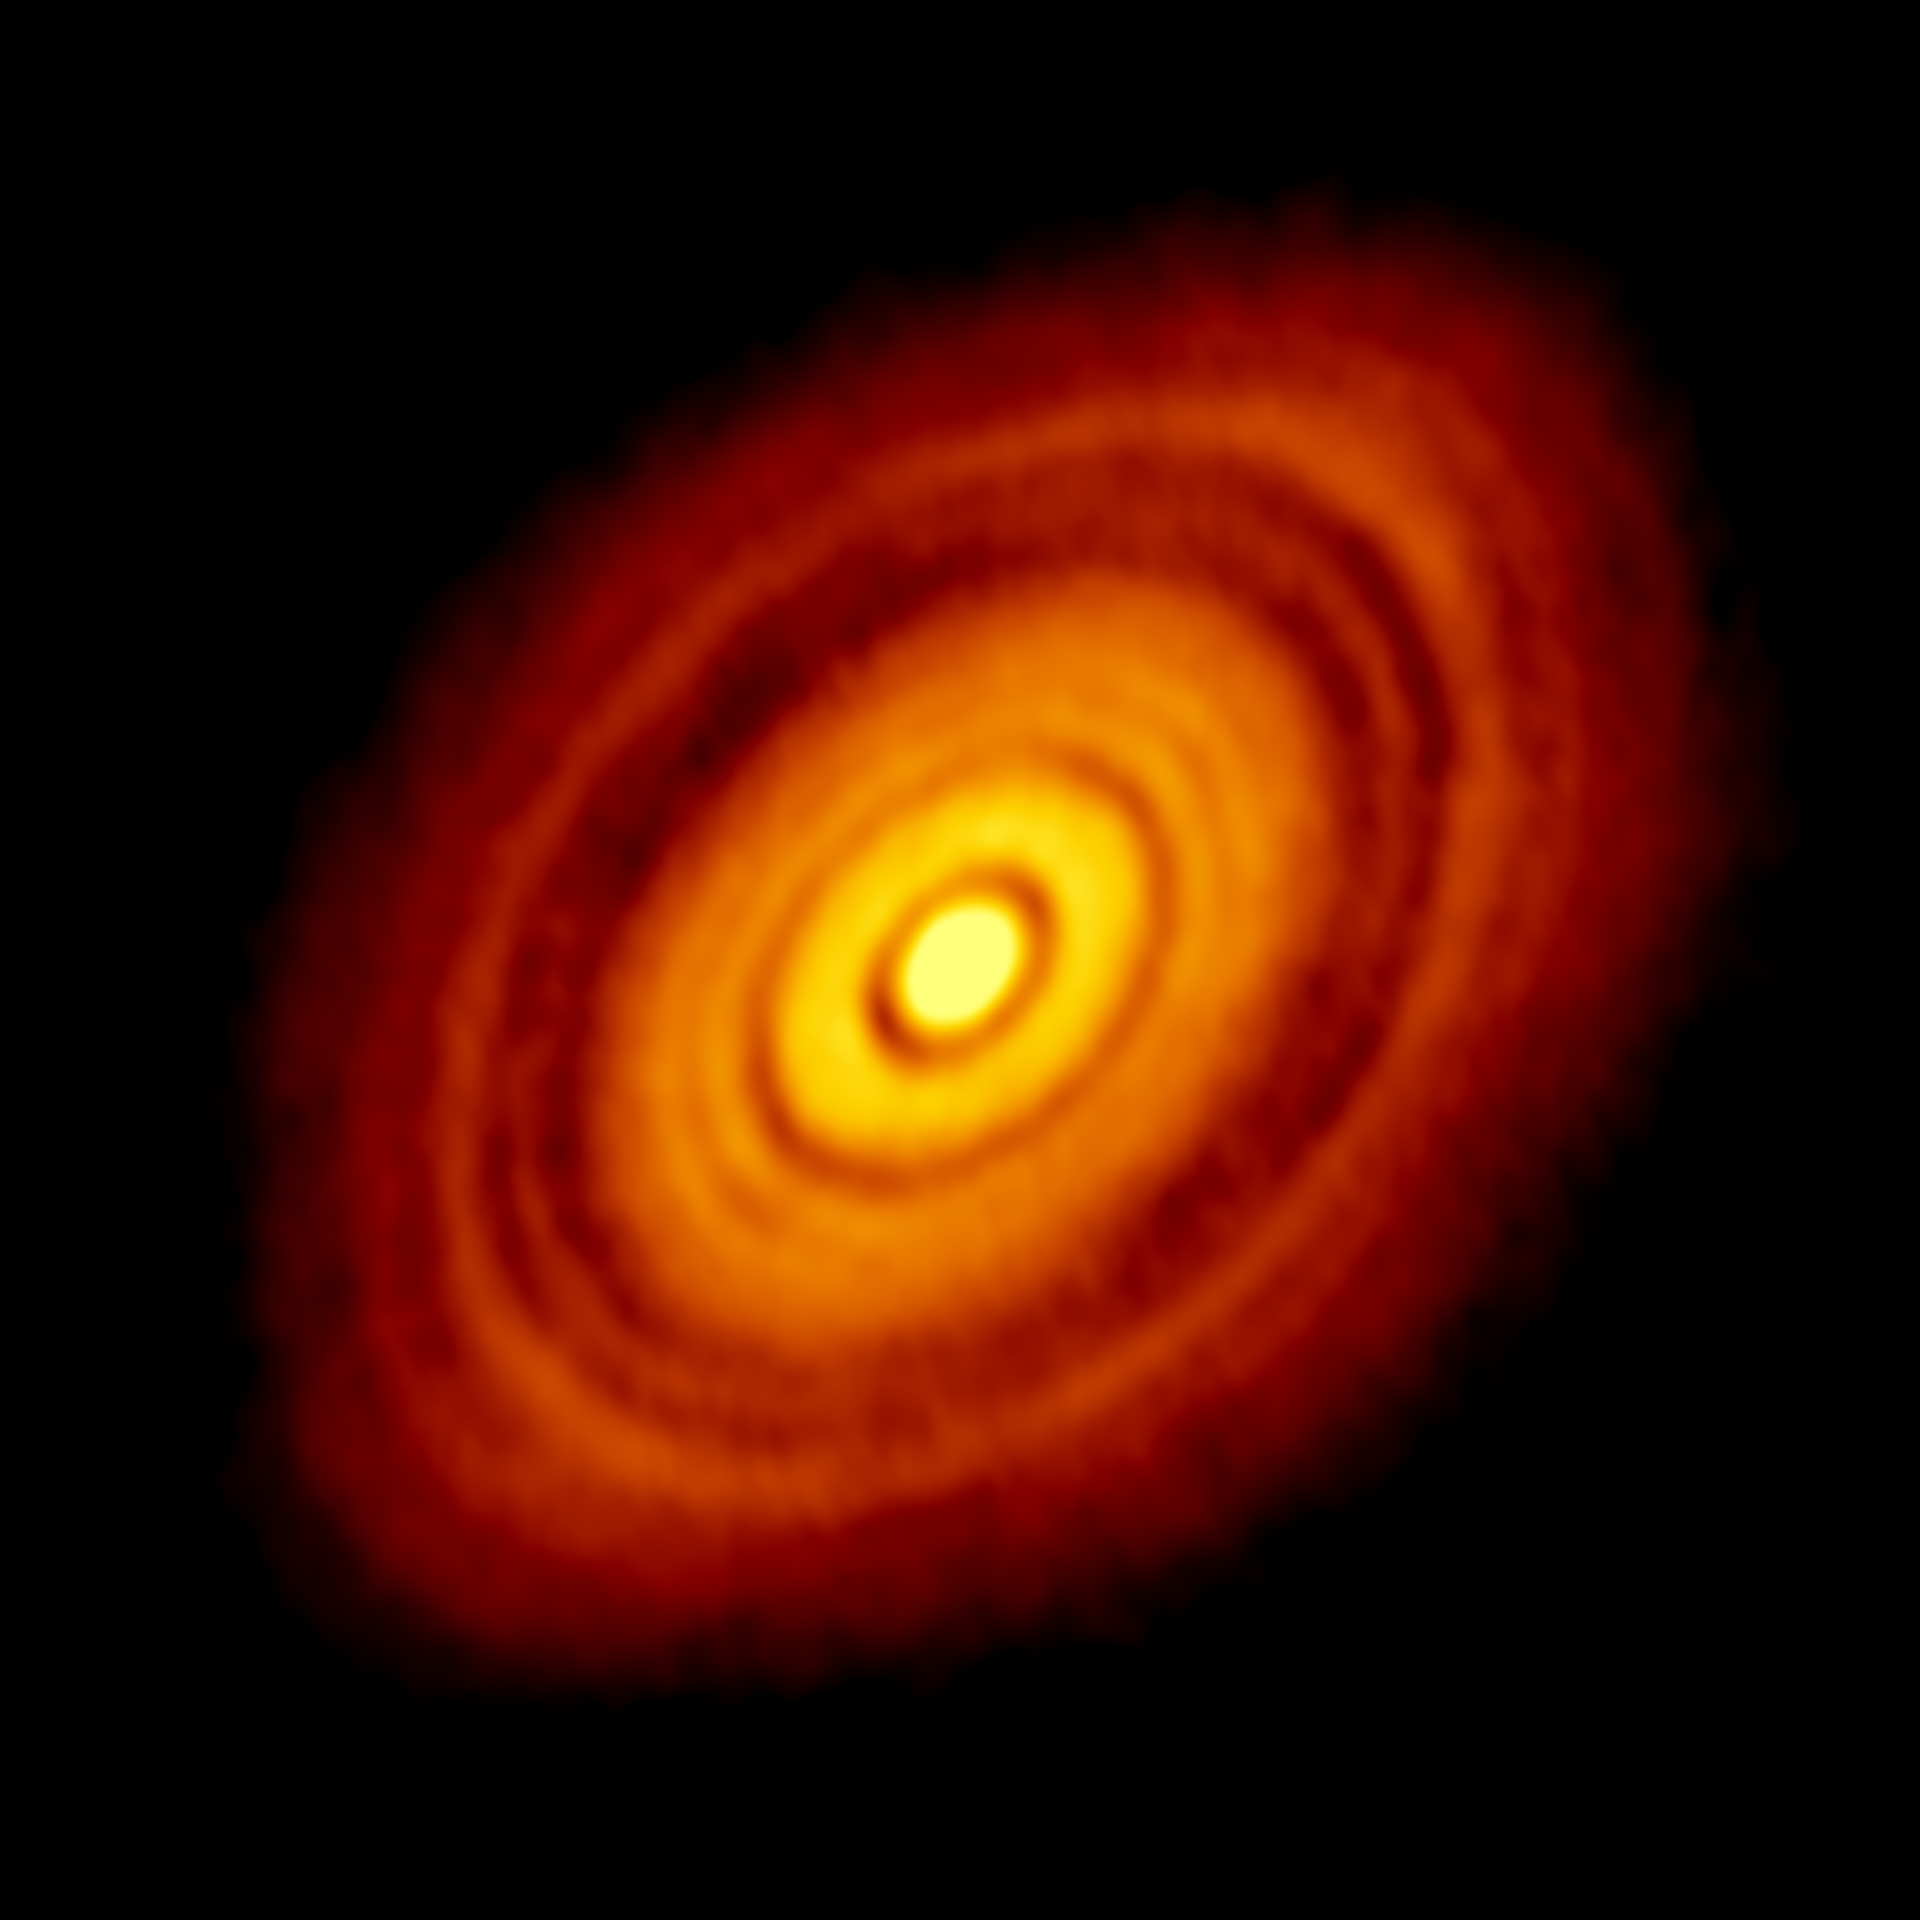 Reprocessed Image of HL Tau Protoplanetary Disk